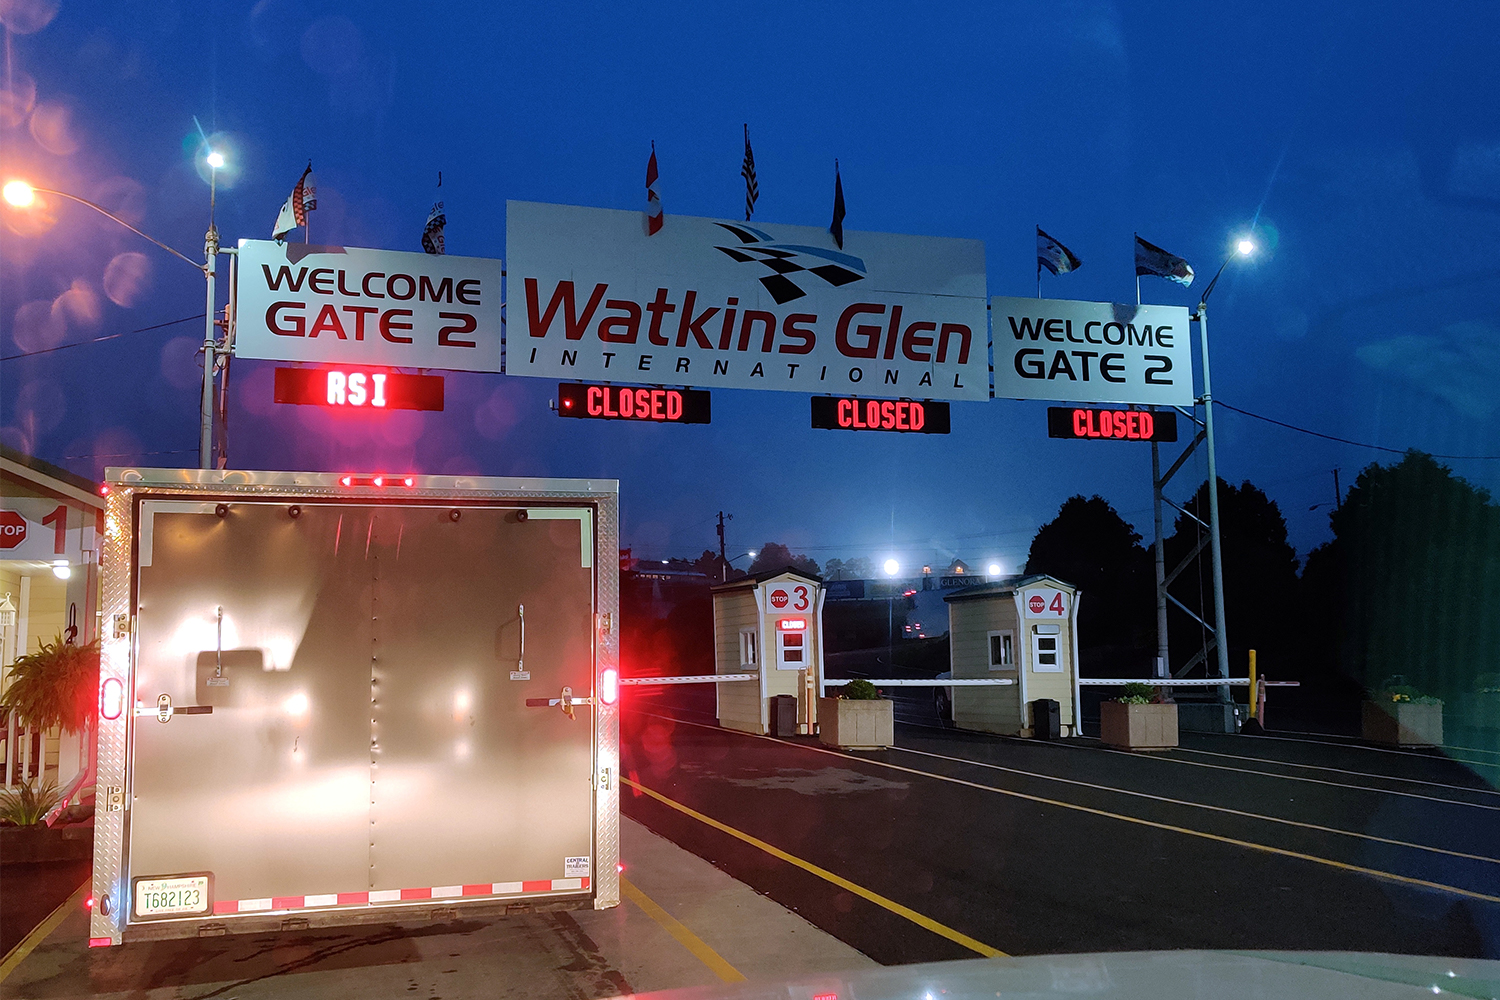 The entrance to Watkins Glen International, one of the oldest road courses in the US